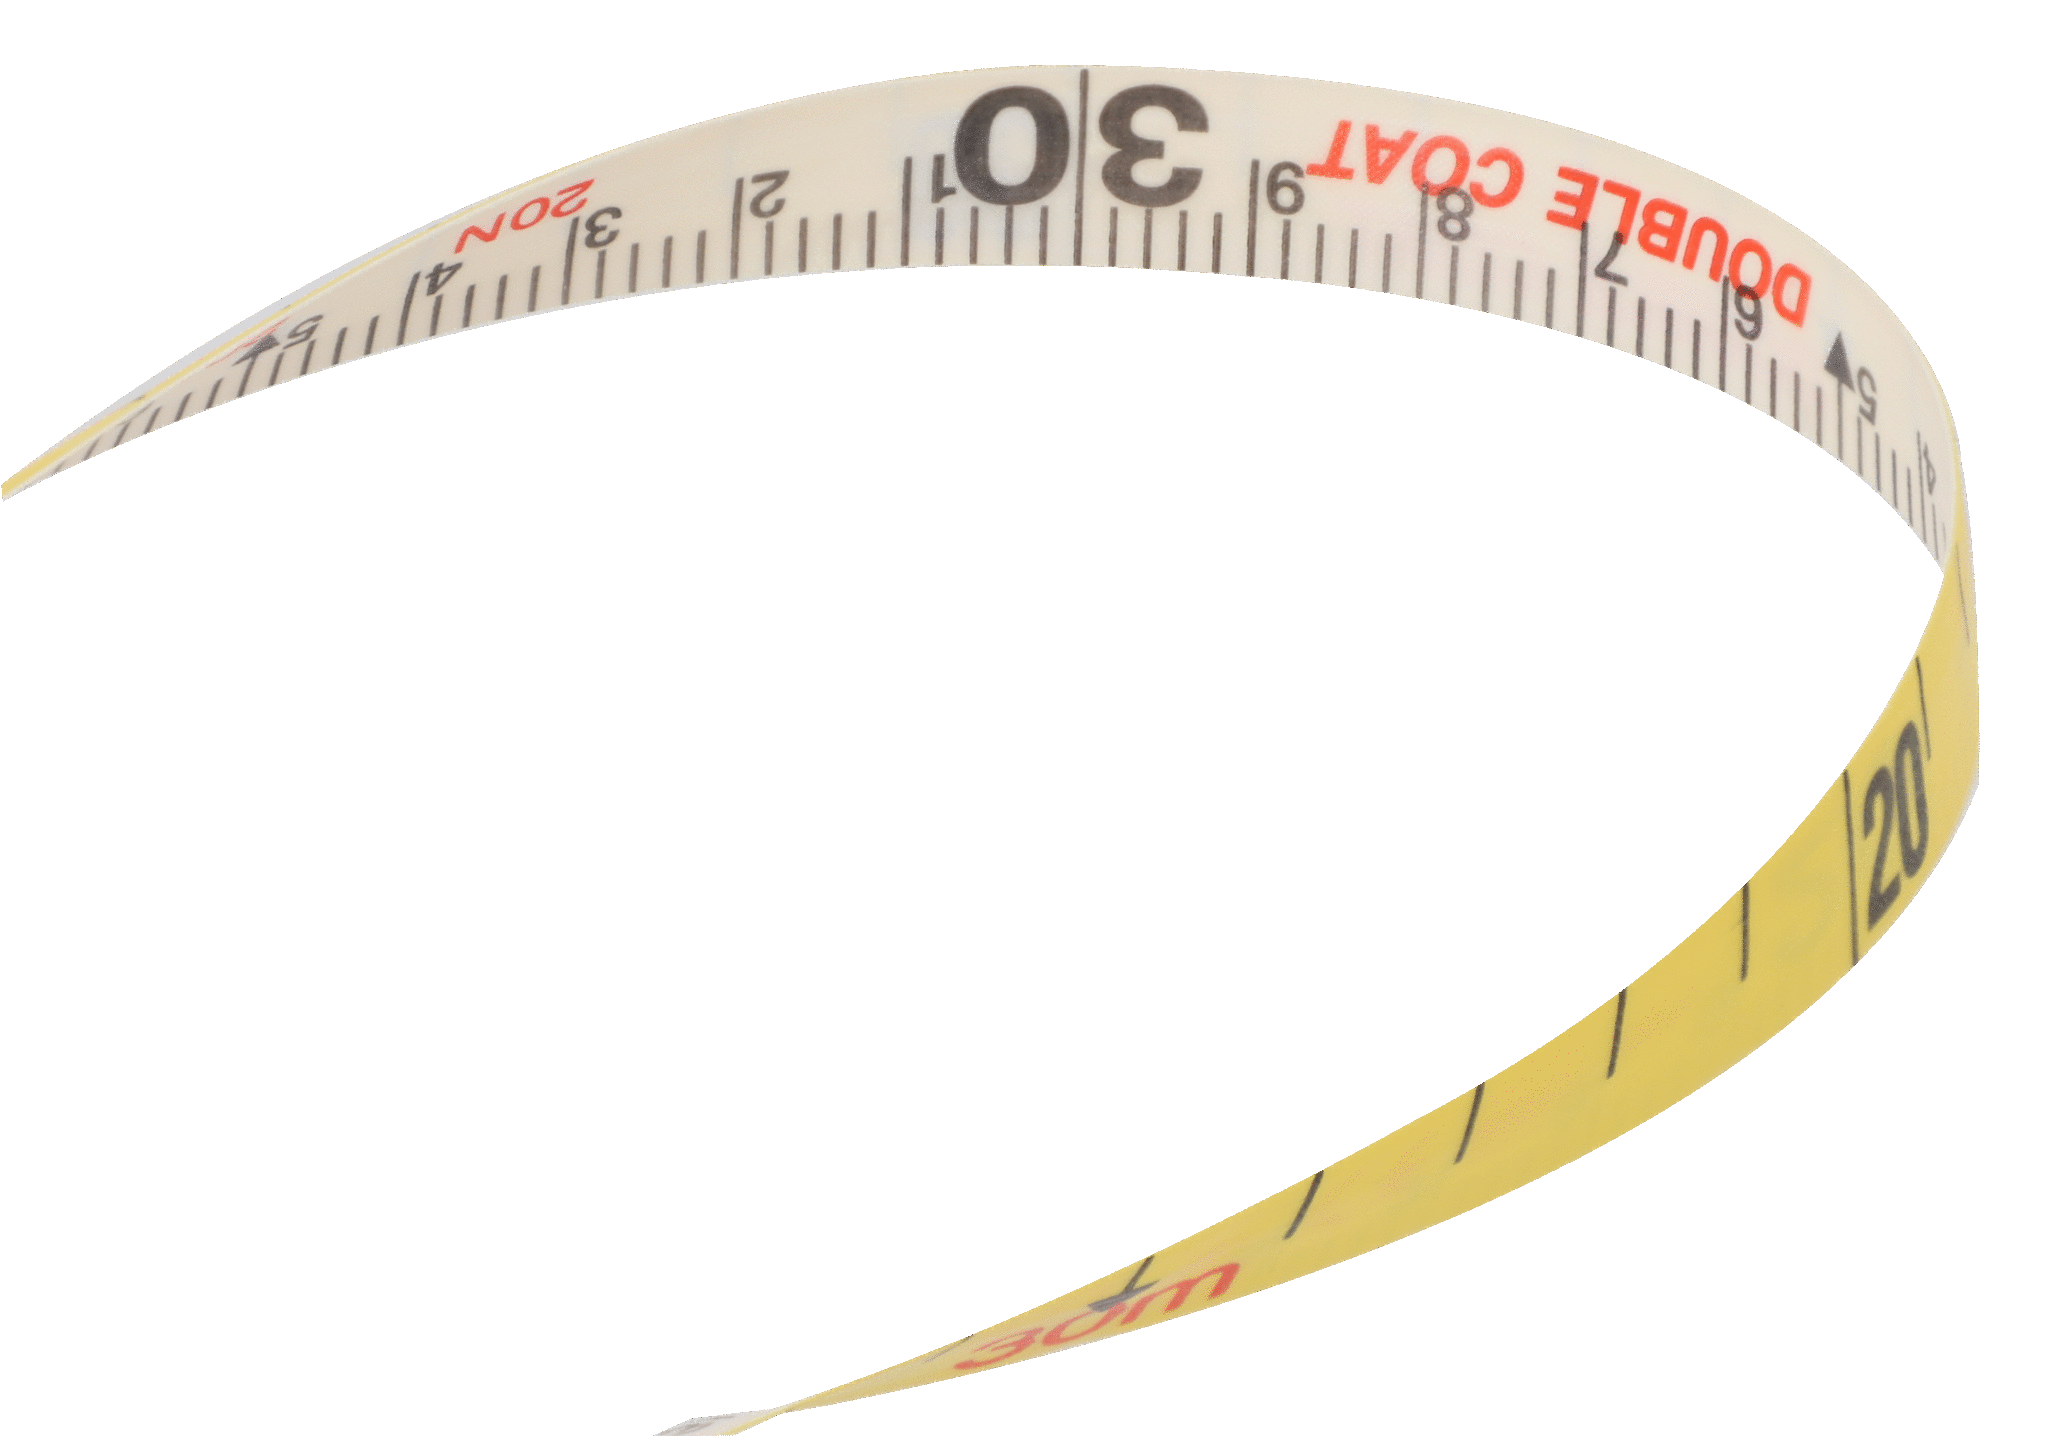 100m Open Long Reel Tape Measure LTS-100 by Bahco